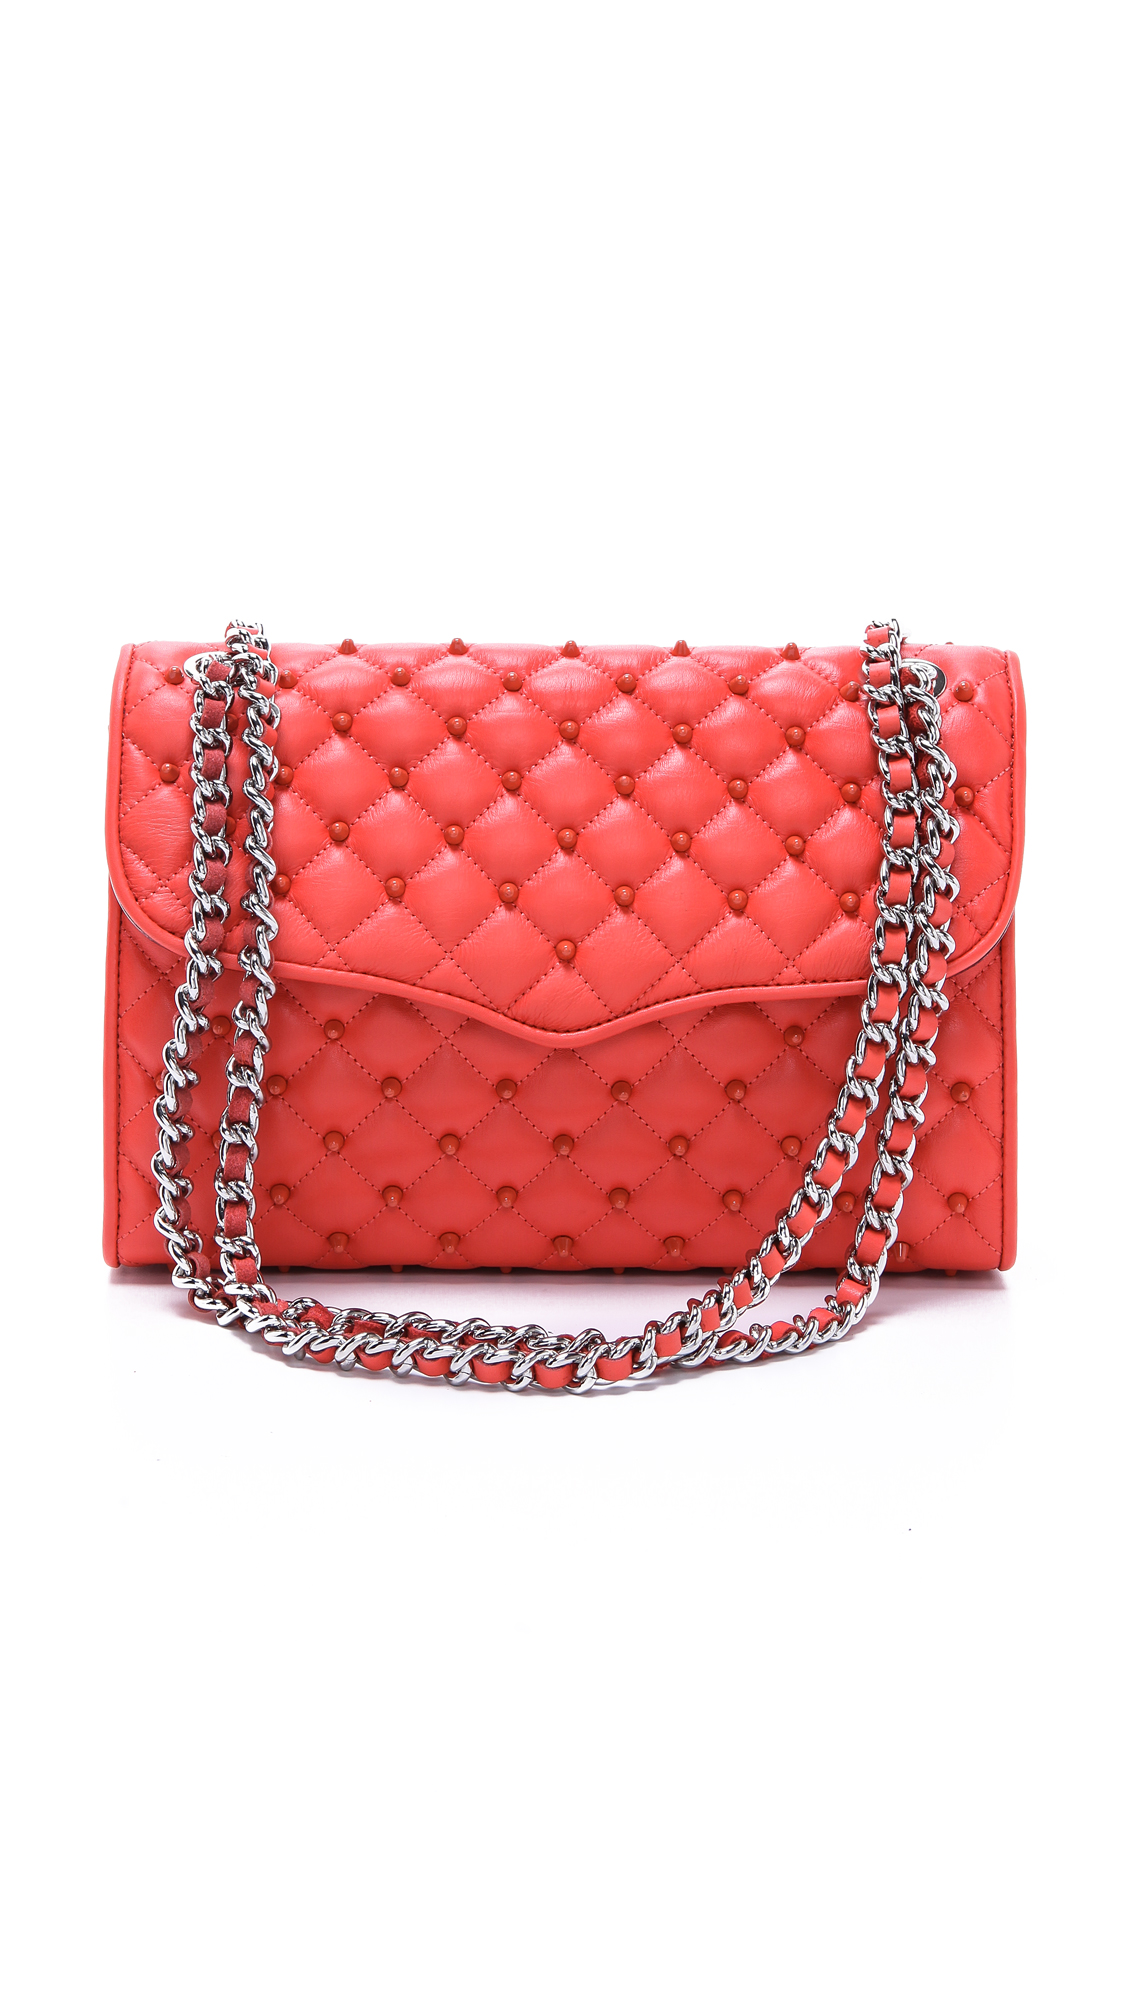 Rebecca Minkoff Studded Quilted Affair Bag in Orange | Lyst